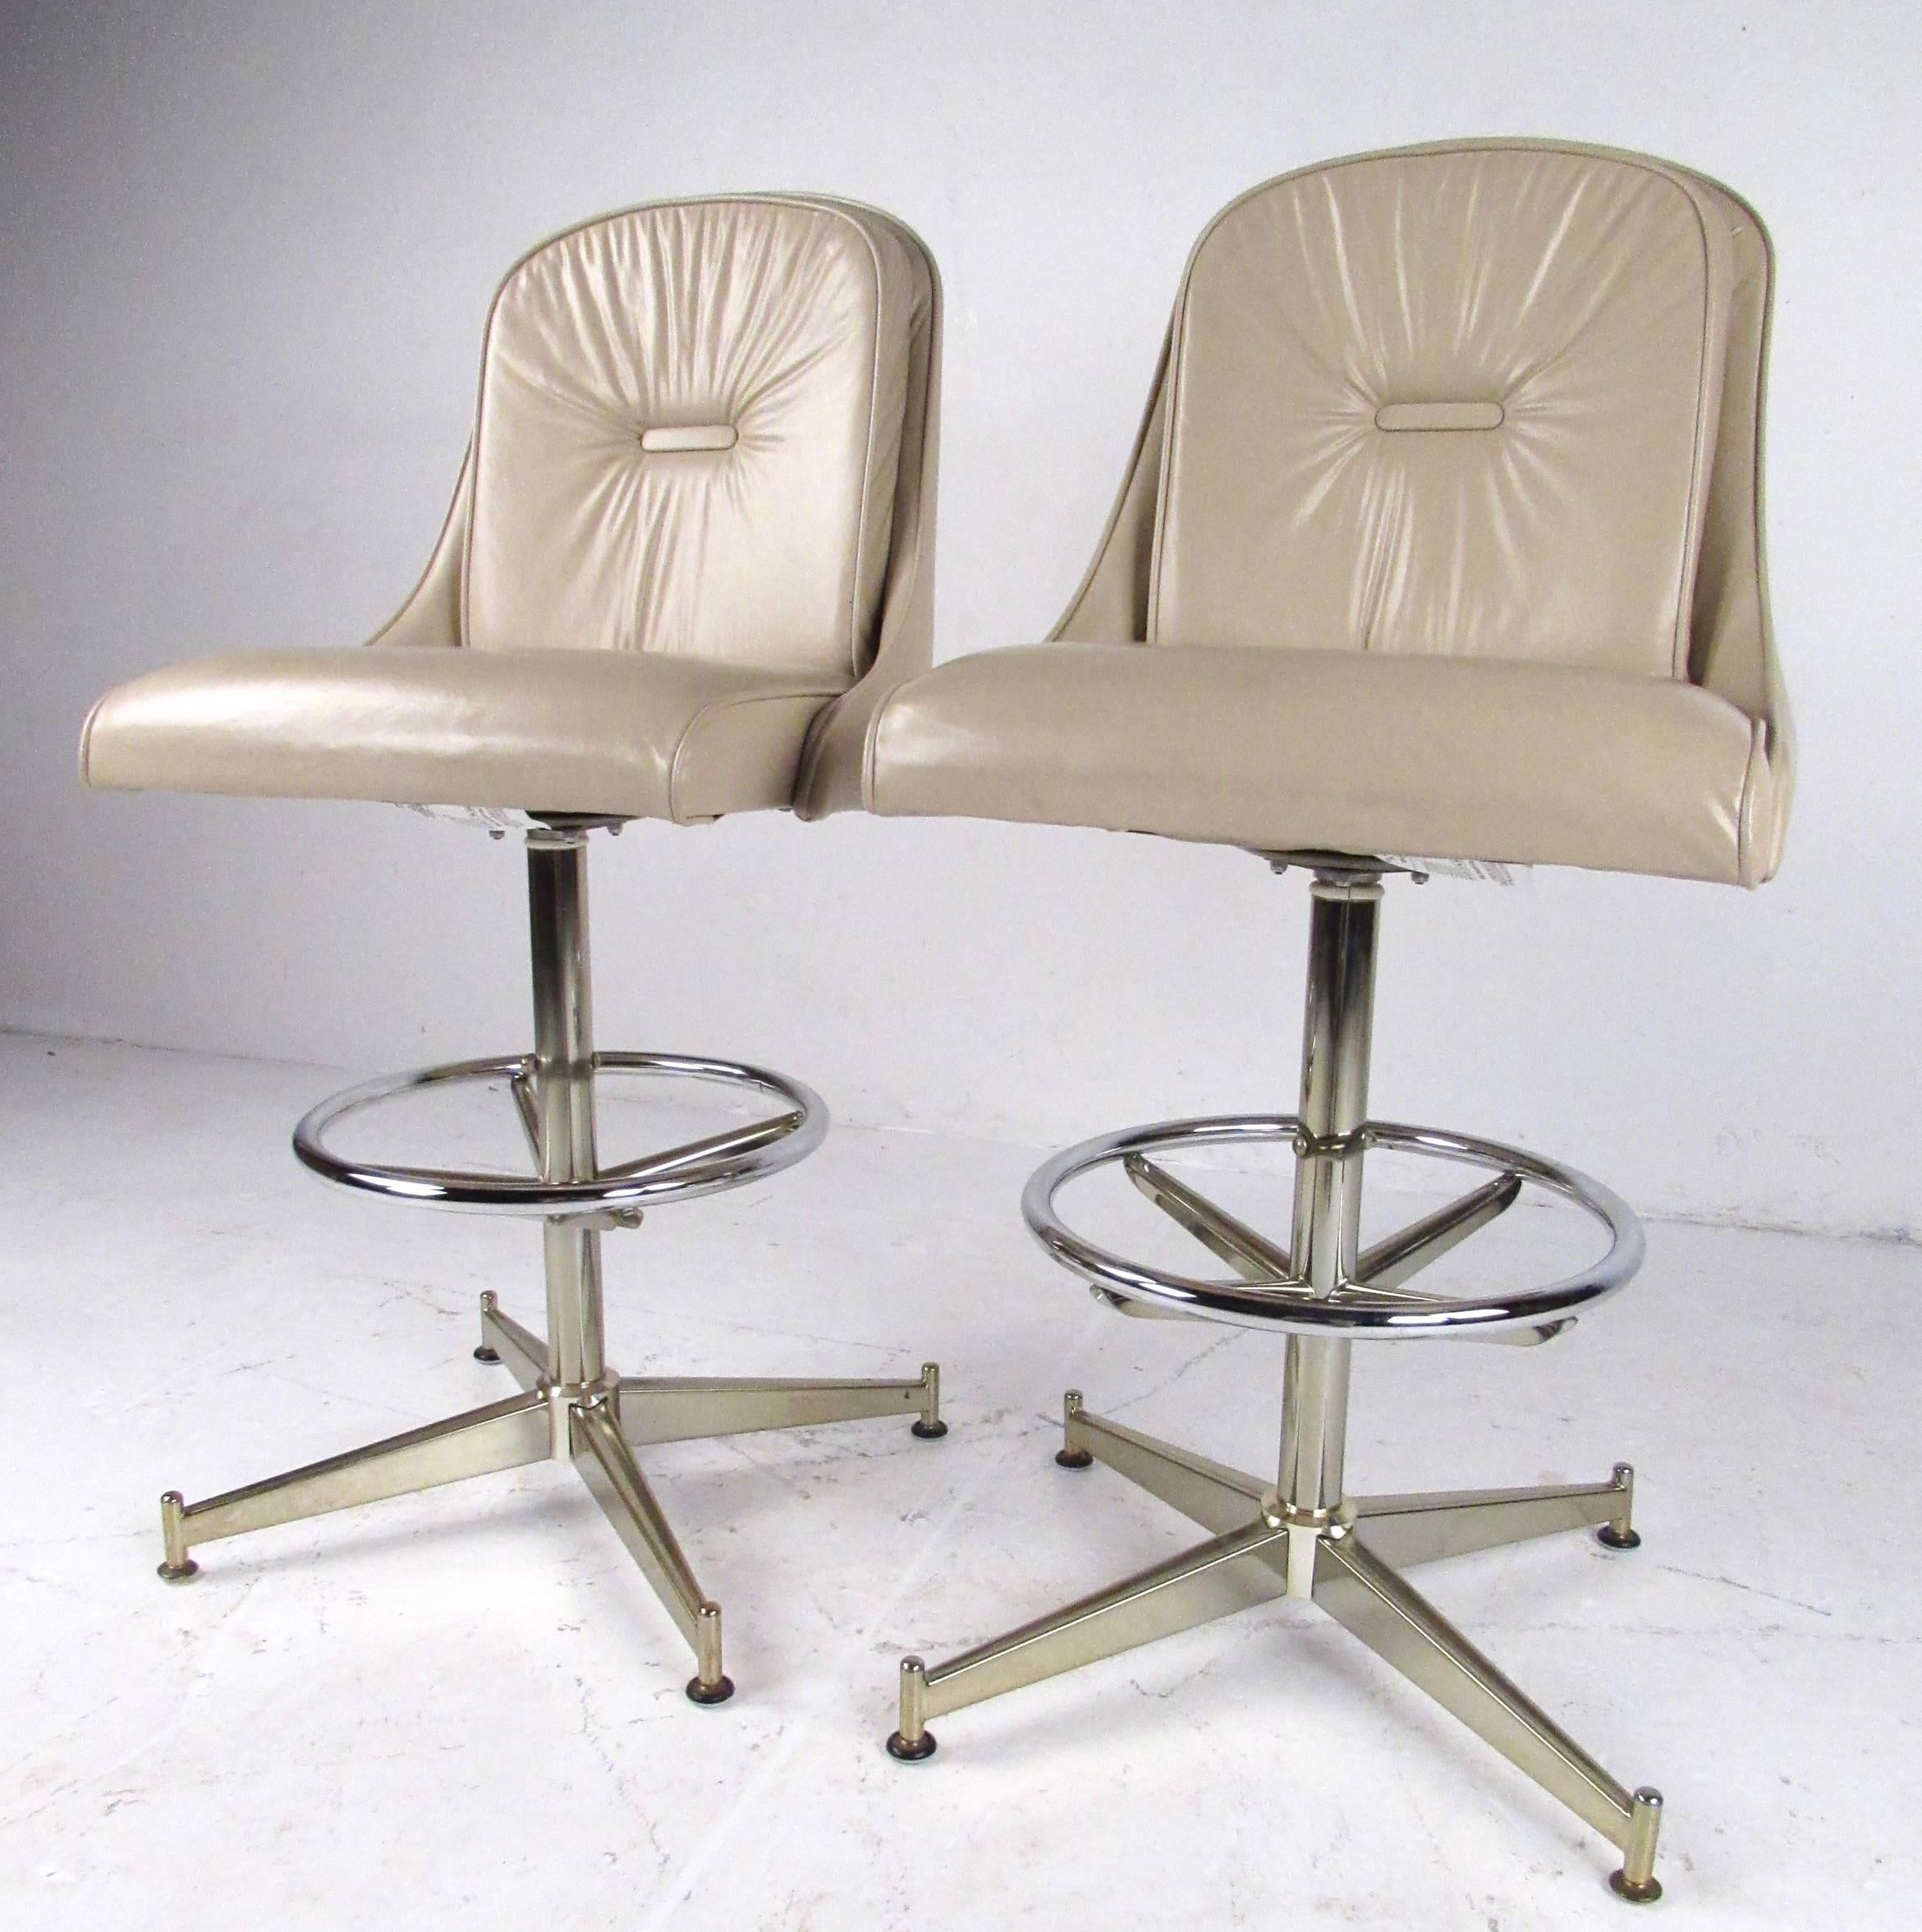 This vintage modern pair of barstools by Daystrom feature swivel seats, sturdy metal frames, and fixed twenty seven inch seat height. Striking pair of vinyl barstools for home or restaurant bar seating, please confirm item location, (NY or NJ).